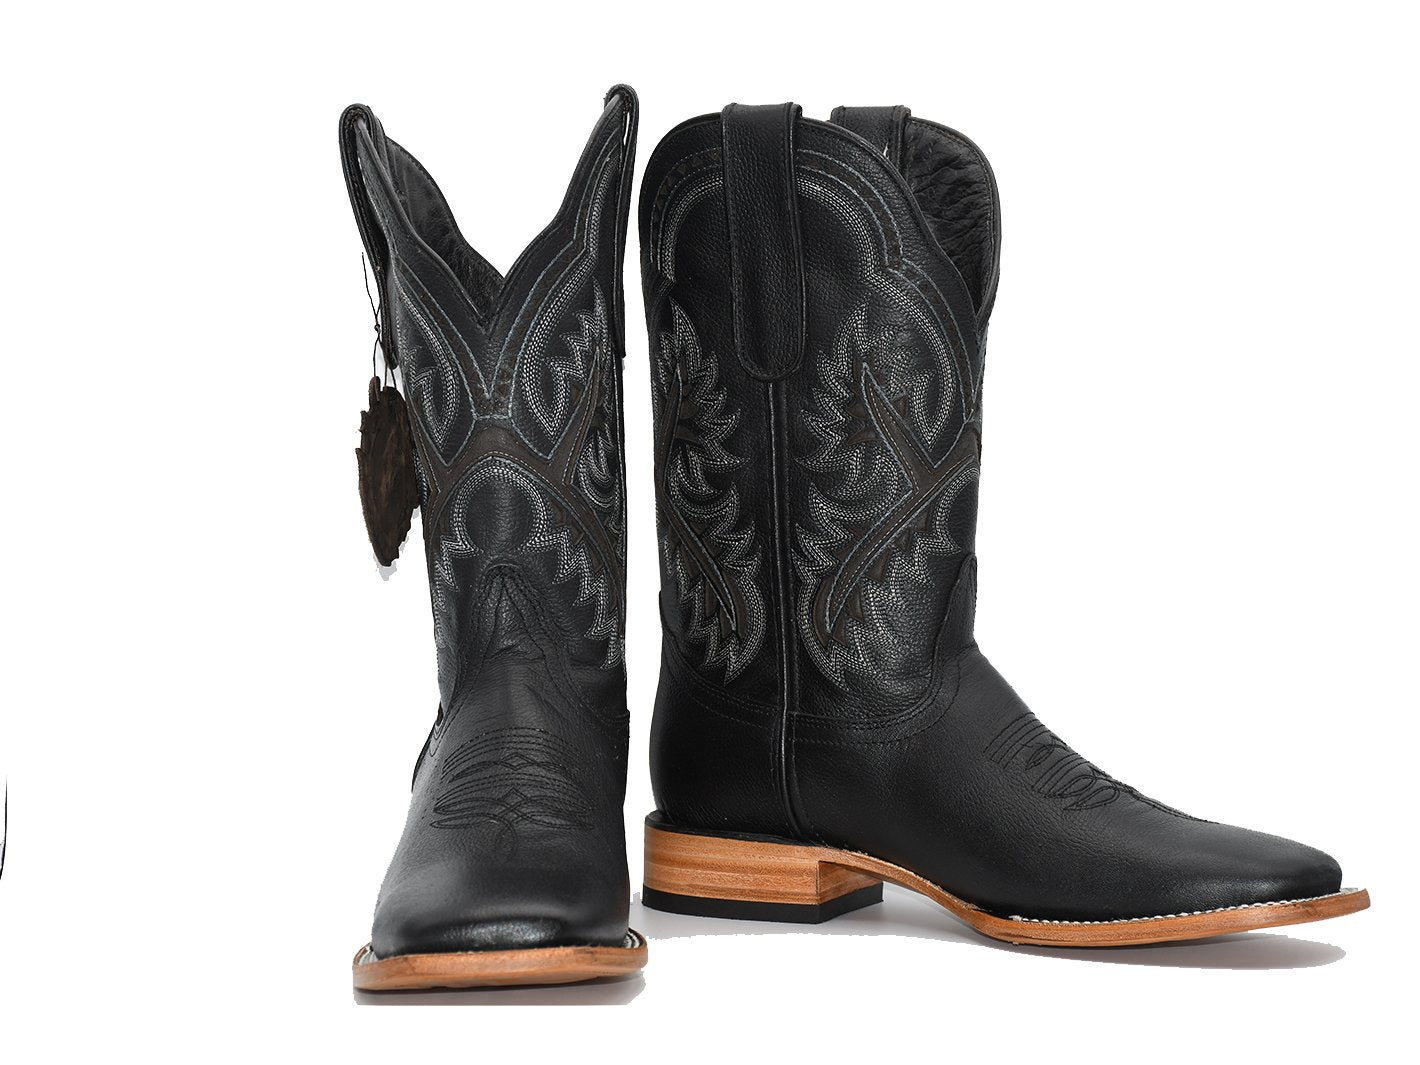 Men's Leather Boots - Online Prices Not Valid at Stores